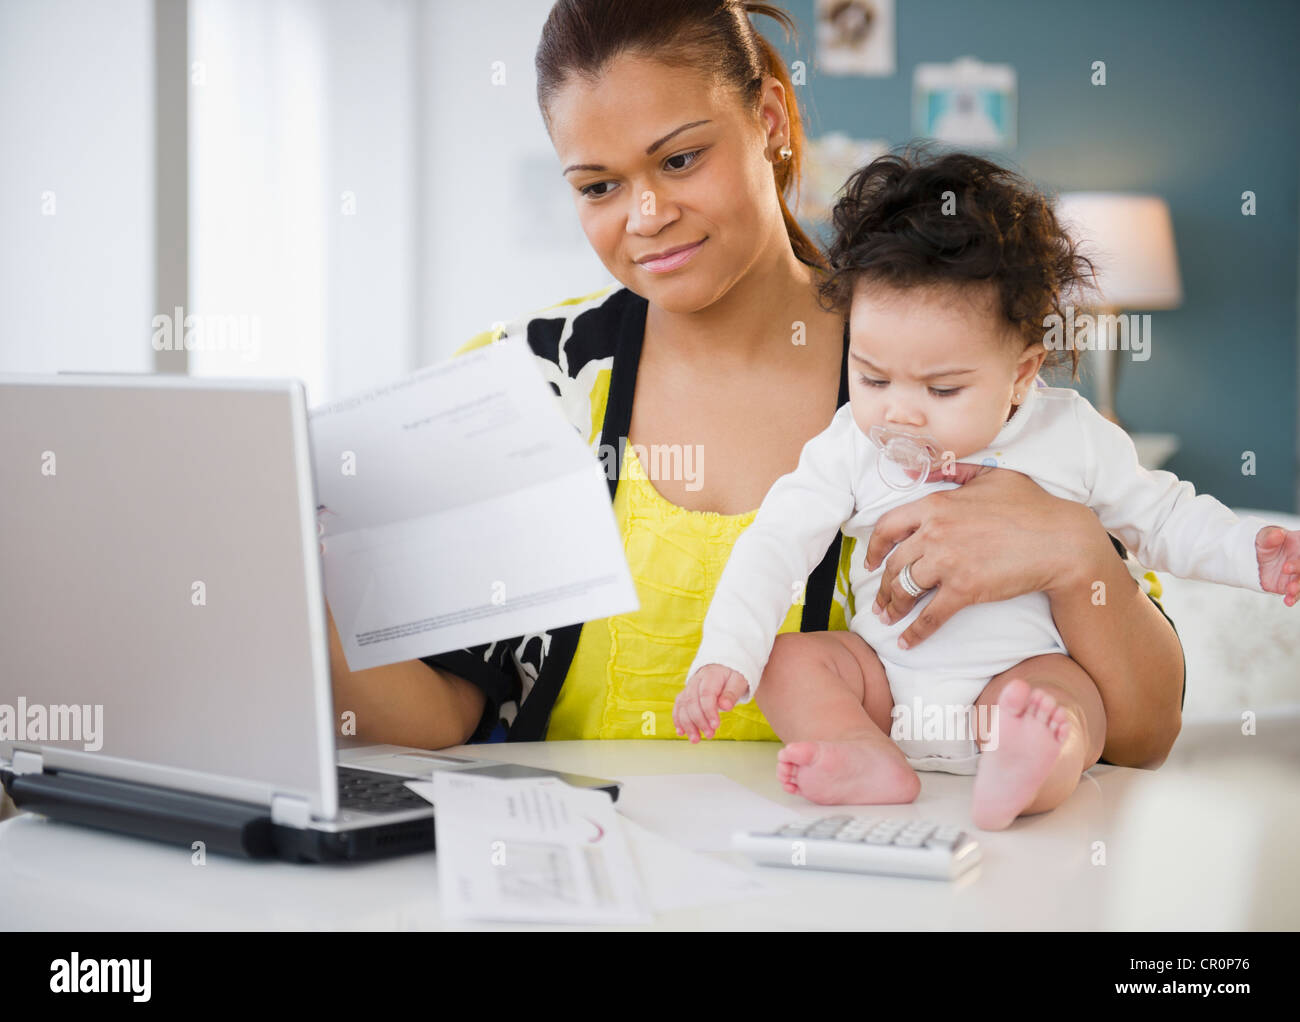 Mixed race mother holding baby and paying bills Stock Photo